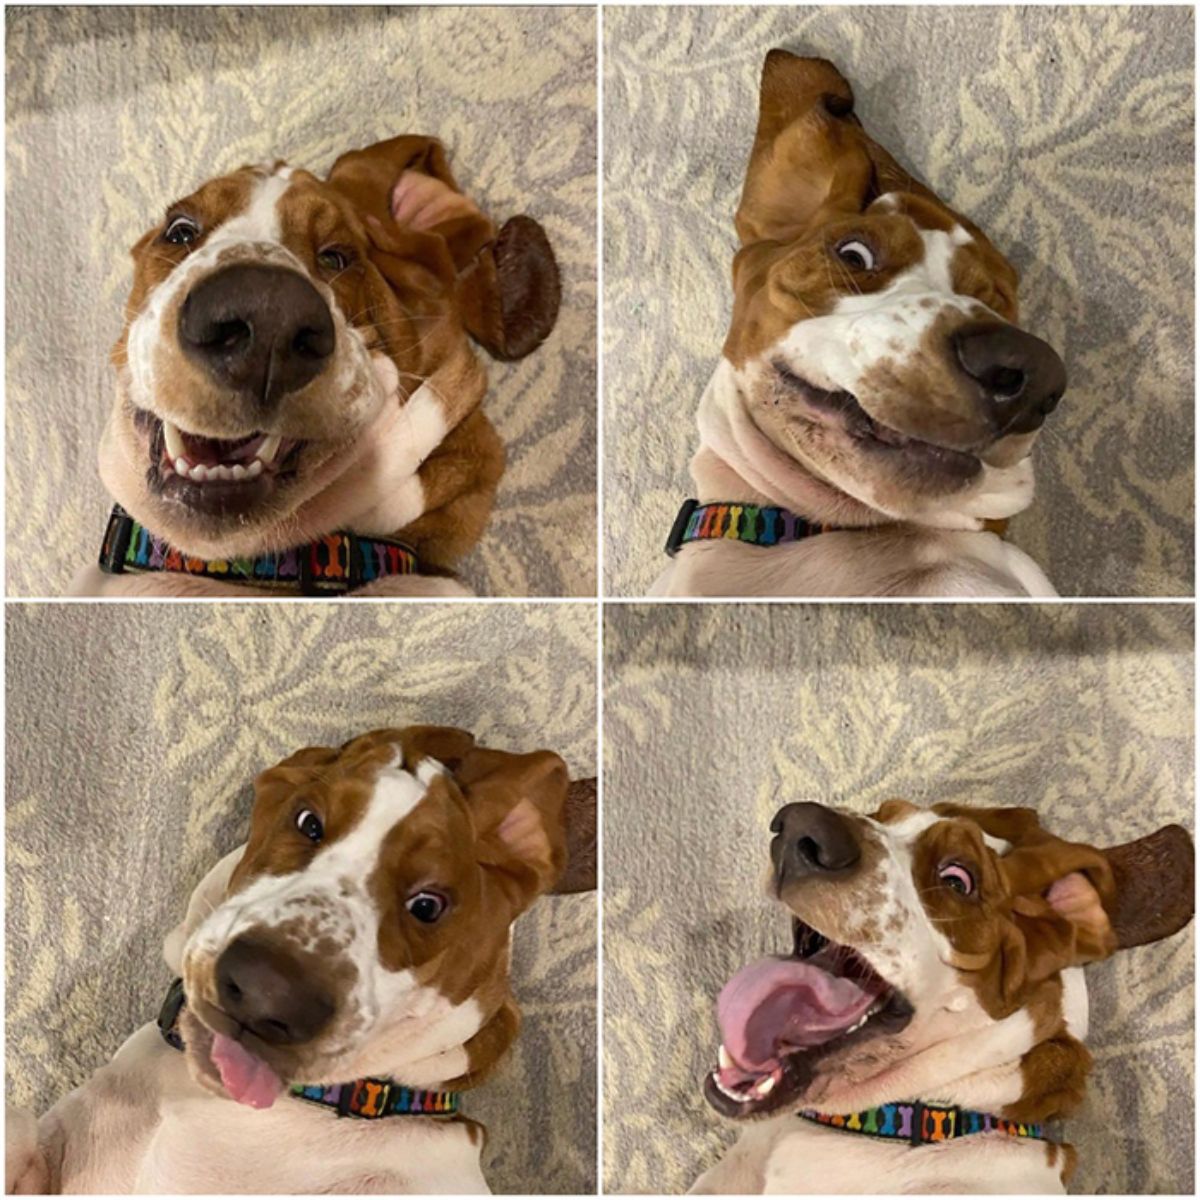 4 photos of a brown and white laying belly up on a carpet and looking derpy